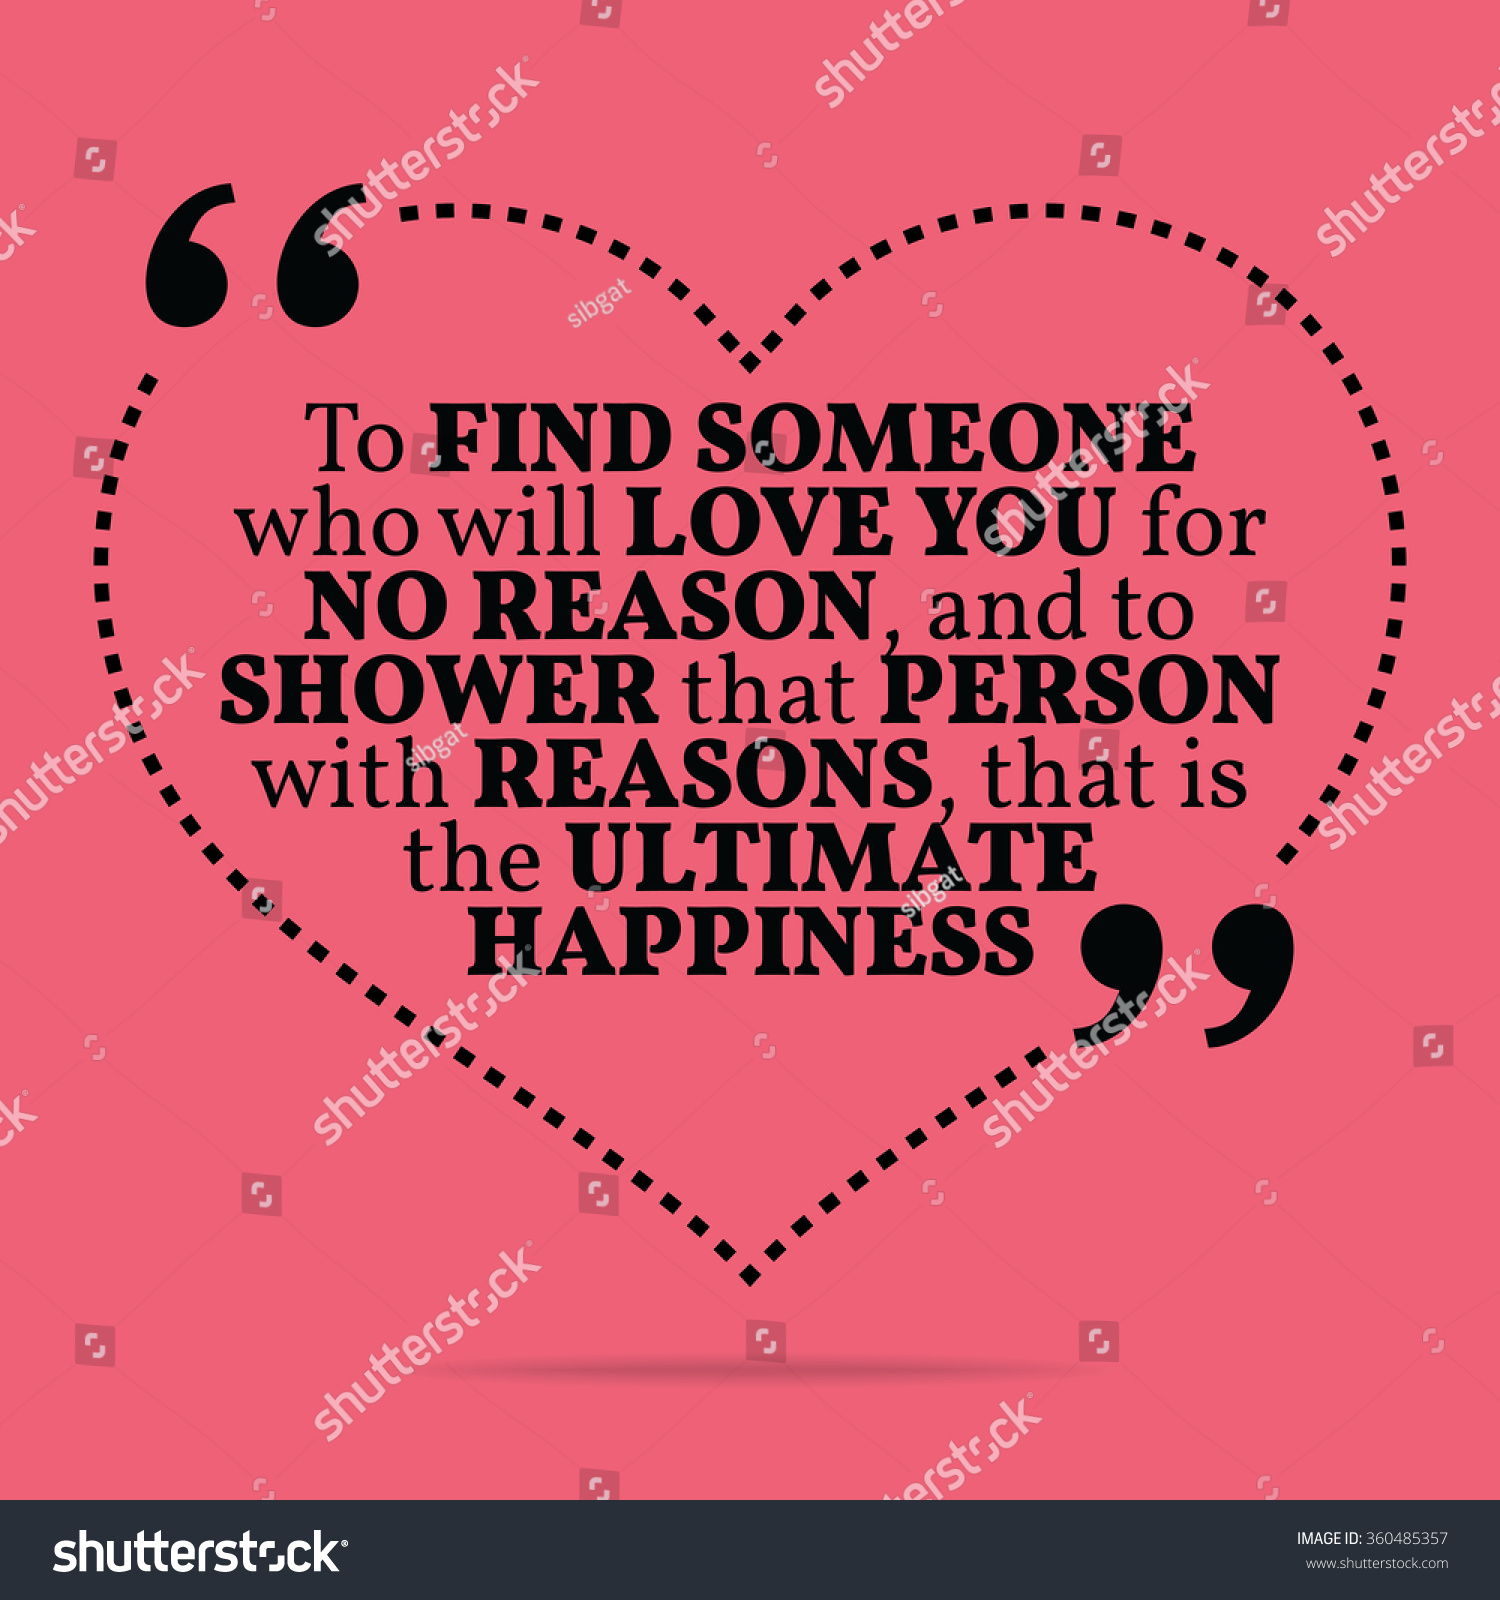 Inspirational love marriage quote To find someone who will love you for no reason